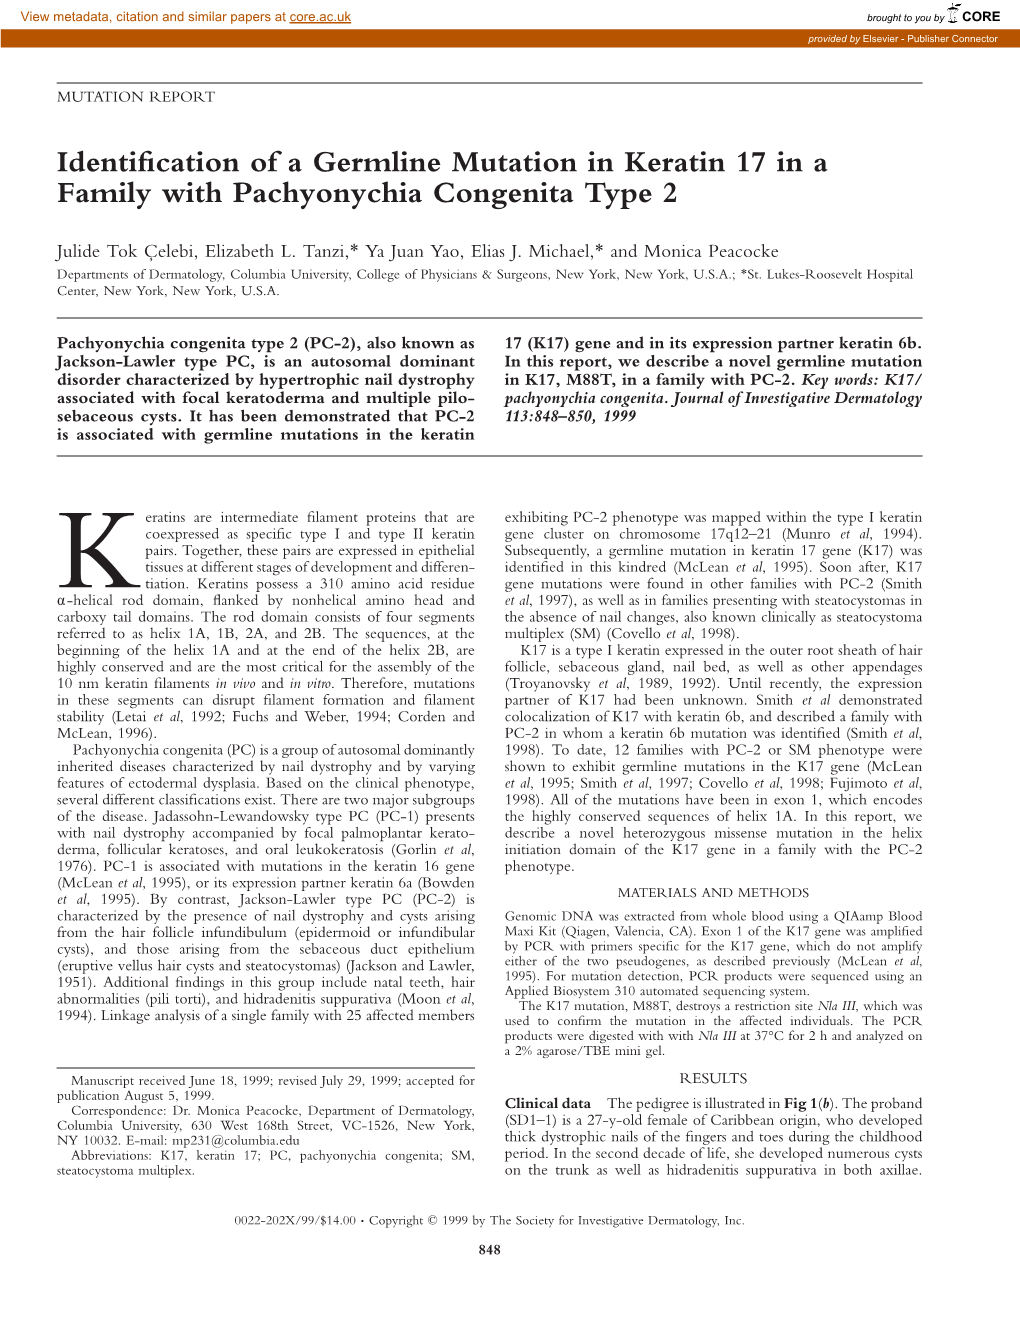 Identification of a Germline Mutation in Keratin 17 in a Family With